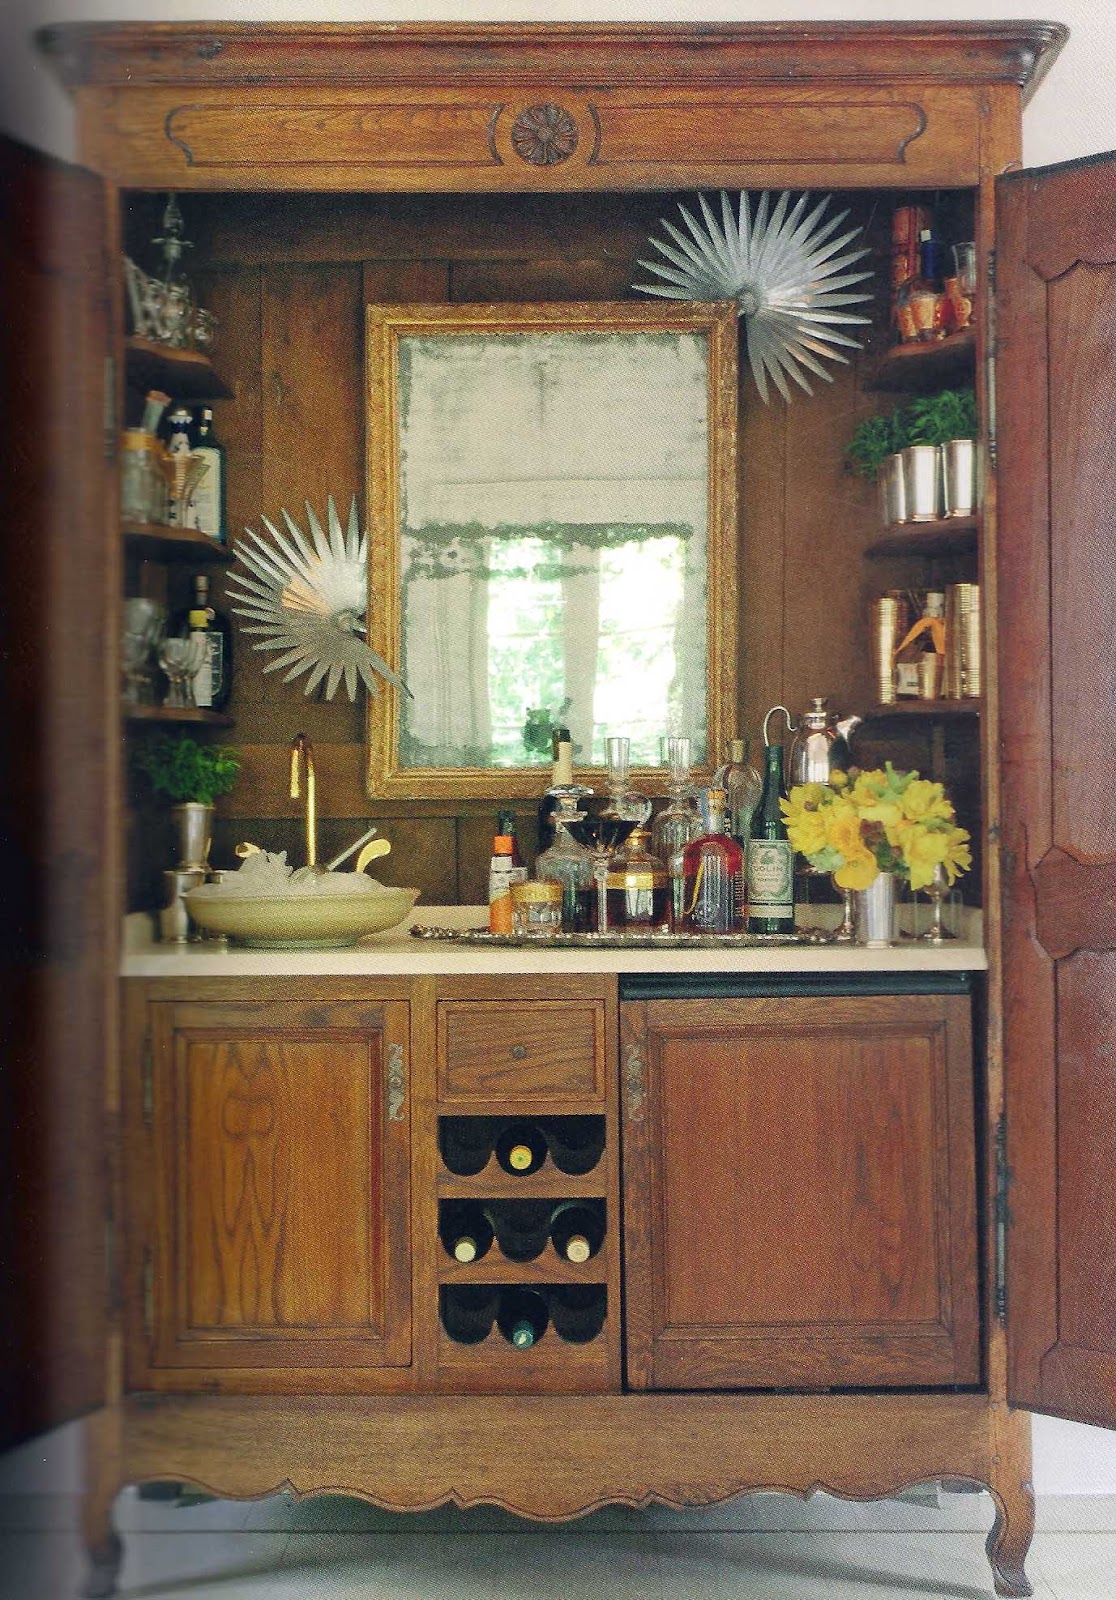 Very Merry Vintage Syle: The Ultimate Bar in an Armoire